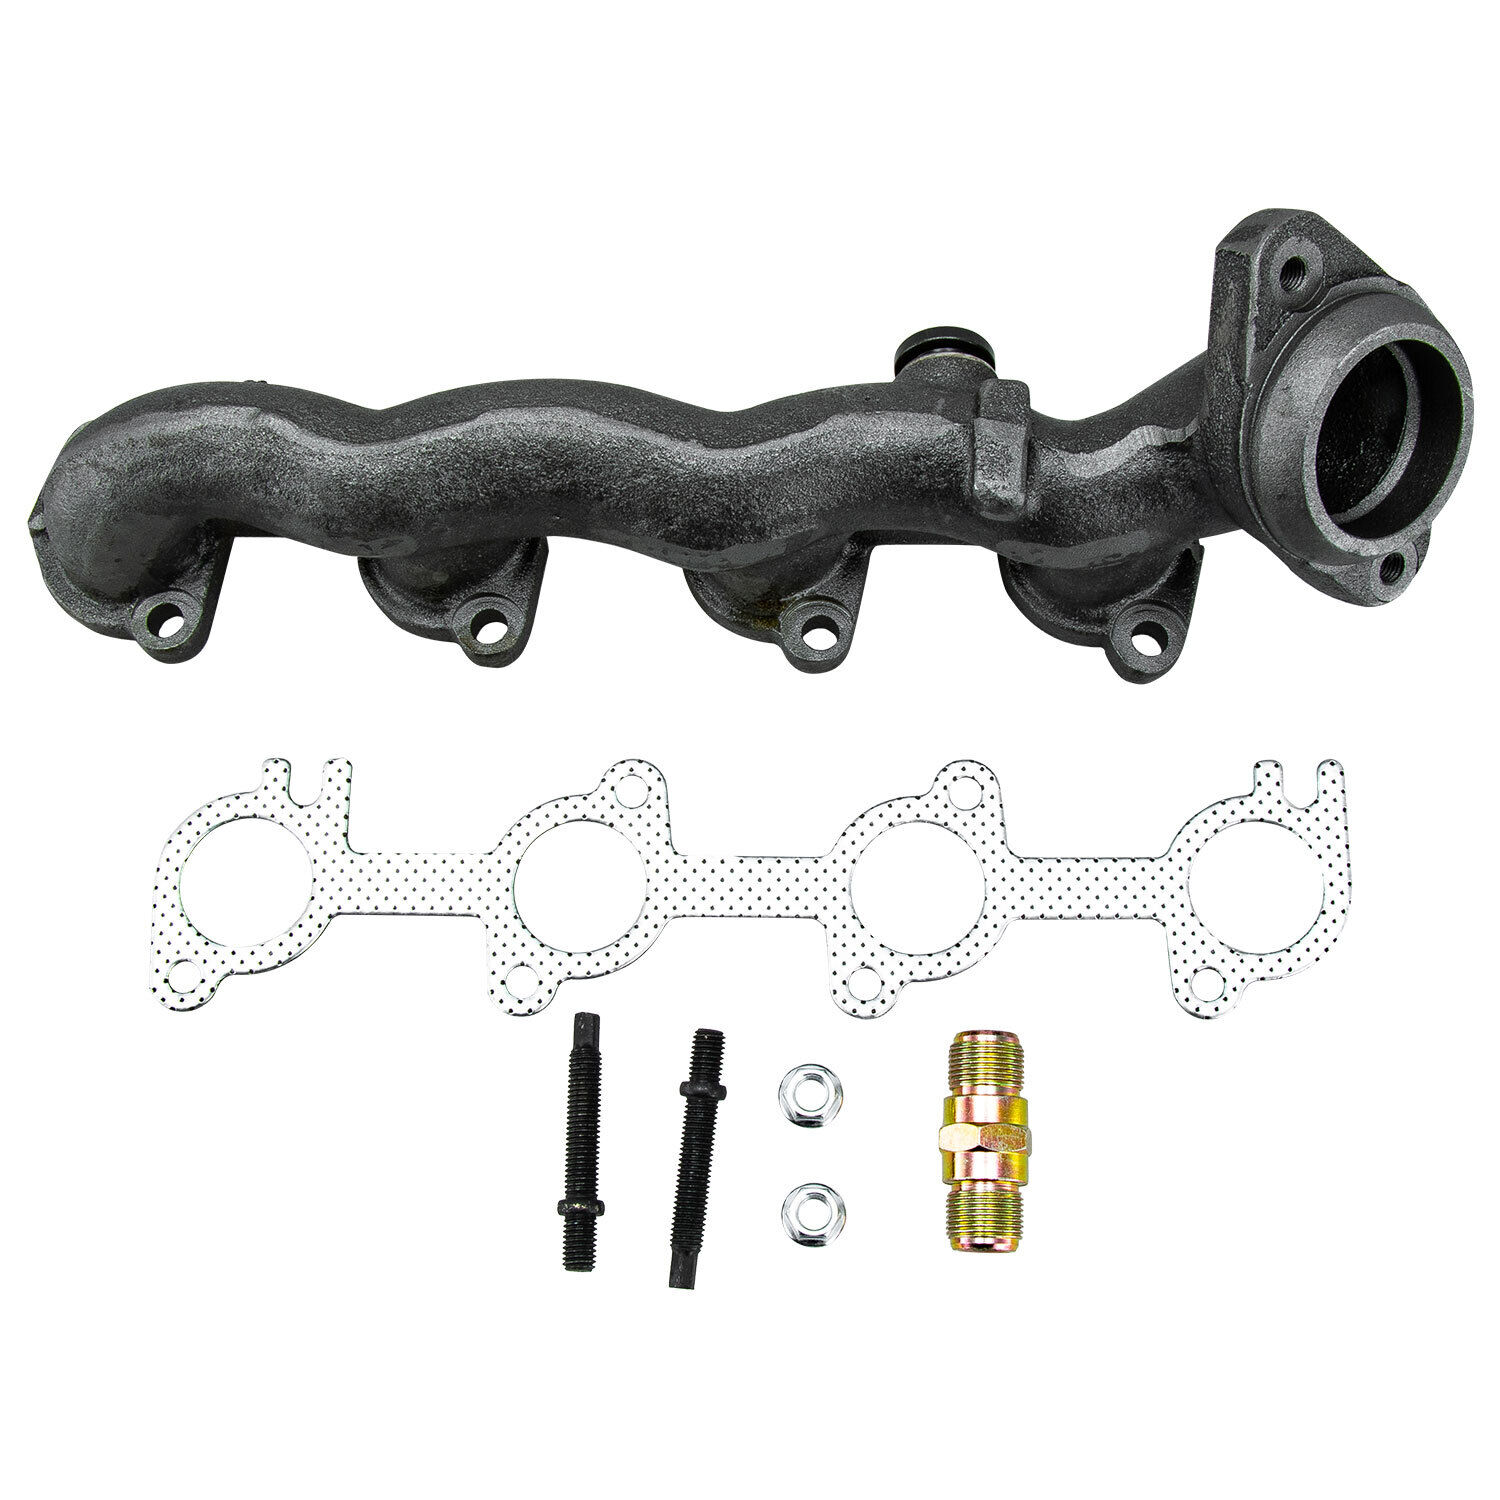 Exhaust Manifold Driver Side Left For 1997 98 Ford Pickup Truck Expedition 4.6L